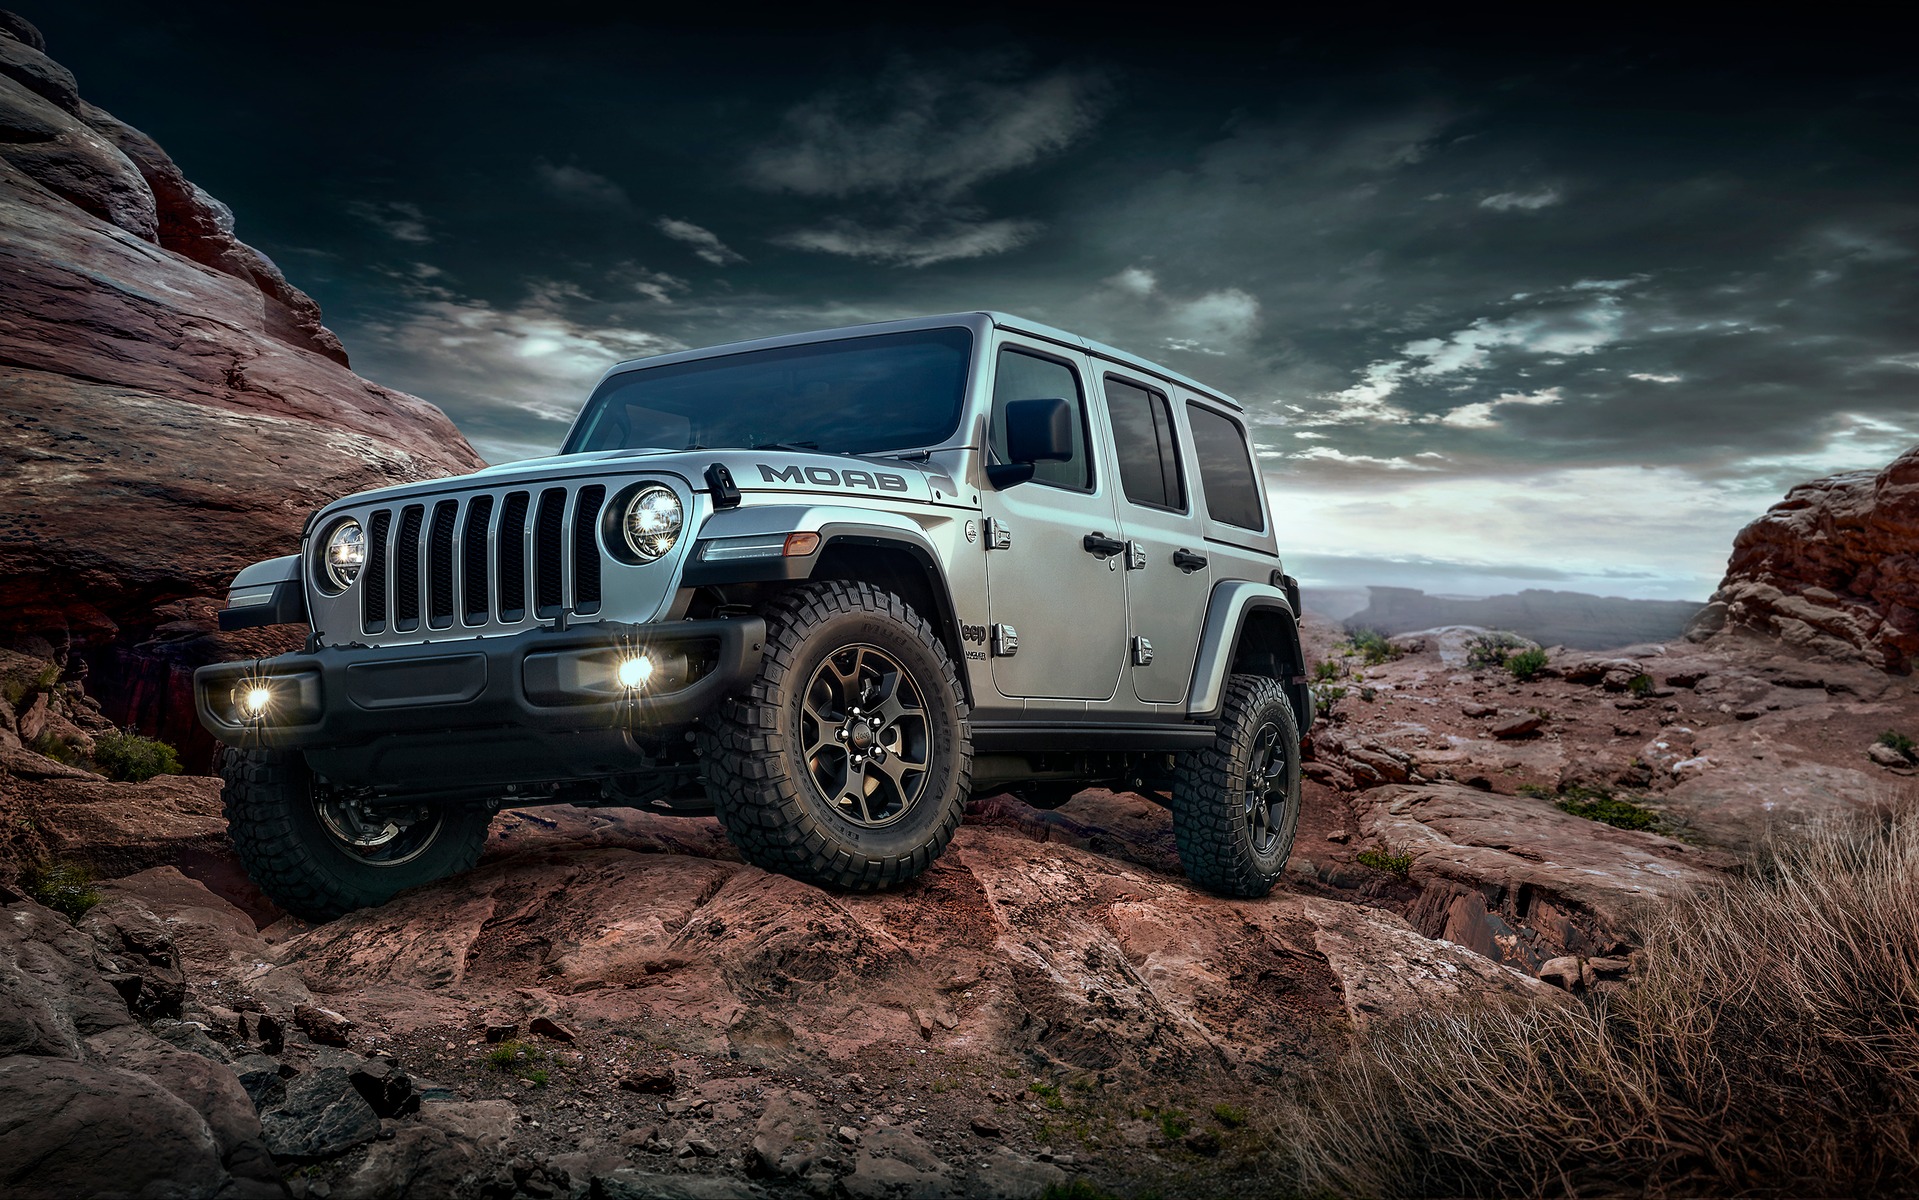 GM May be Planning a Wrangler-style SUV After All - The Car Guide